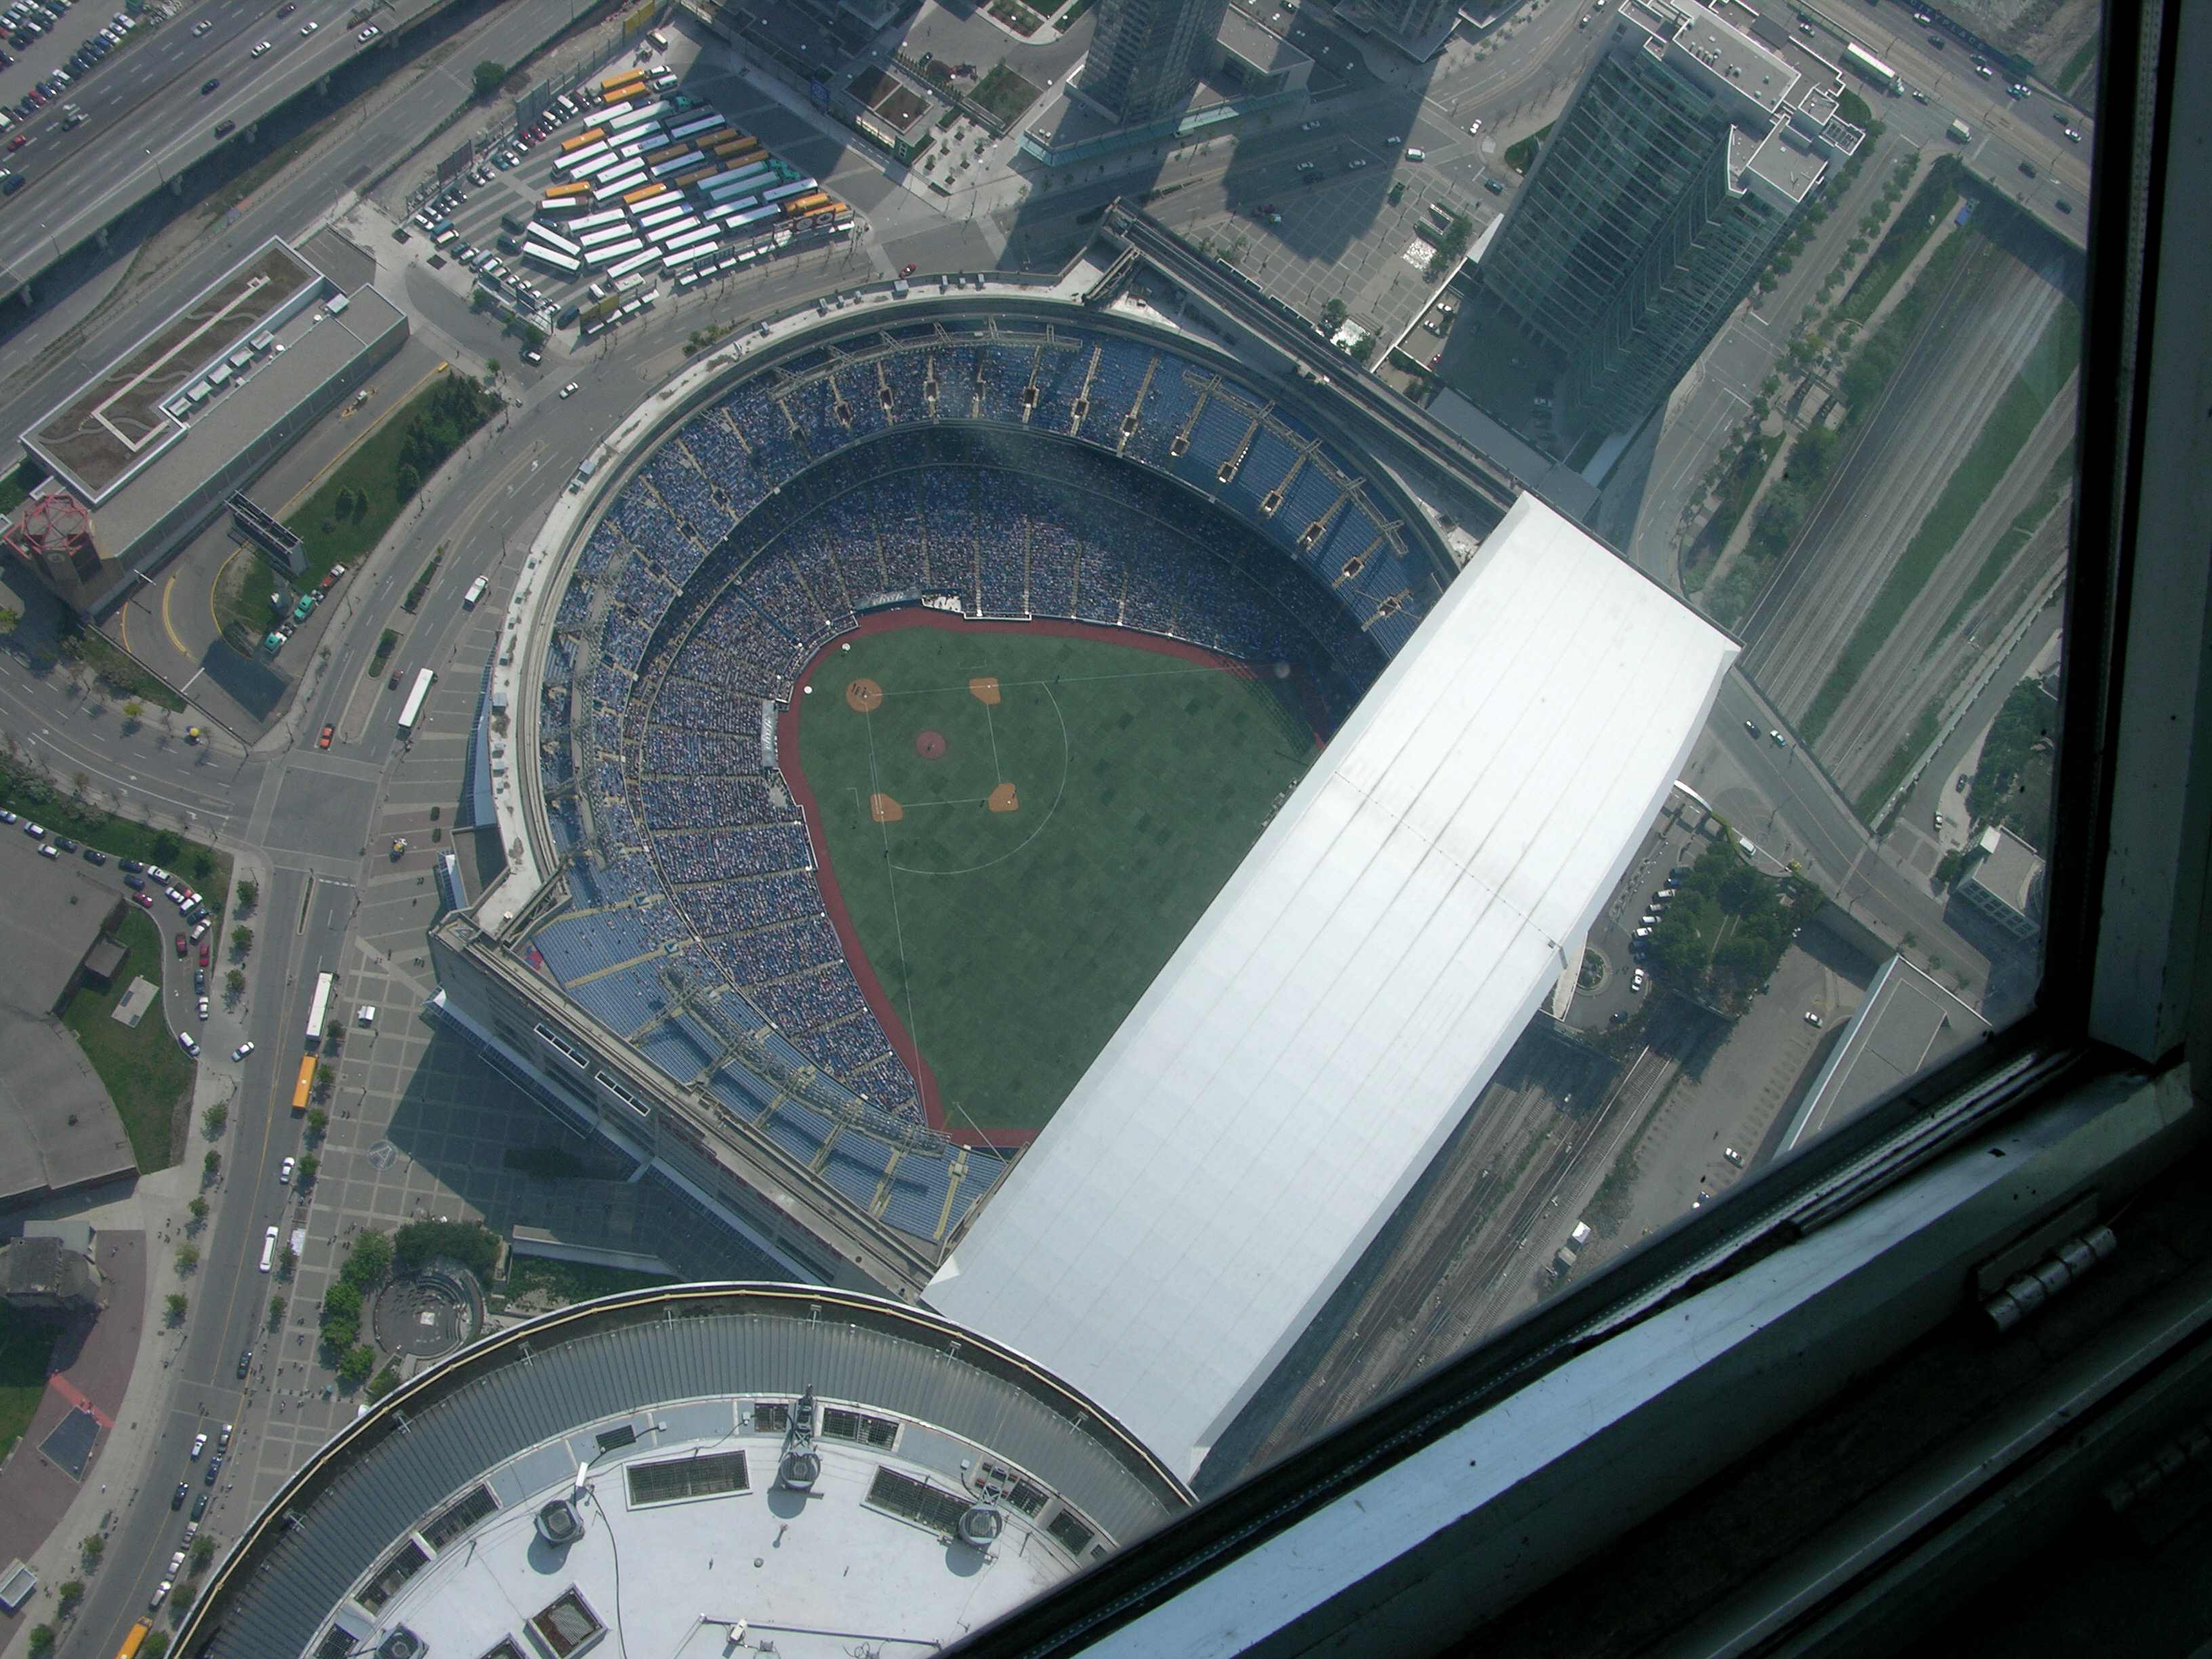 Rogers Centre in Toronto from the CN Tower